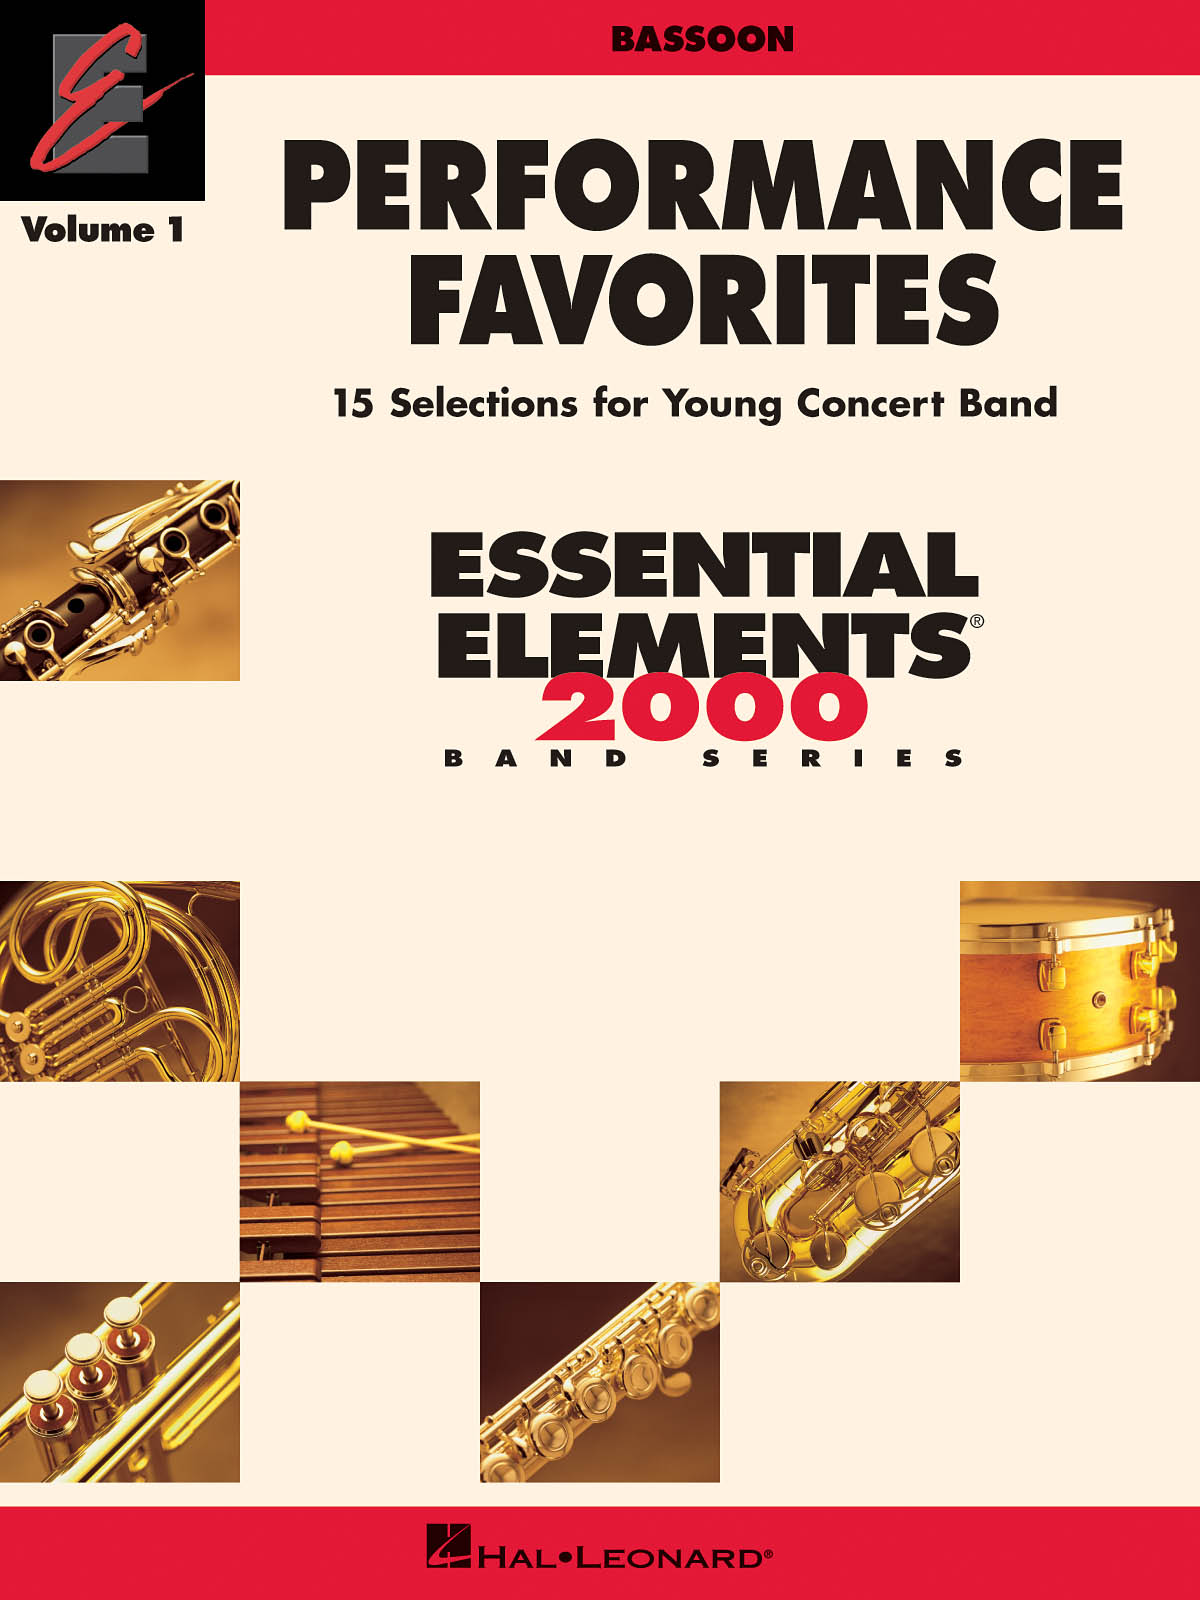 Performance Favorites Vol. 1 - Bassoon - 15 Selections for Young Concert Band - noty na fagot